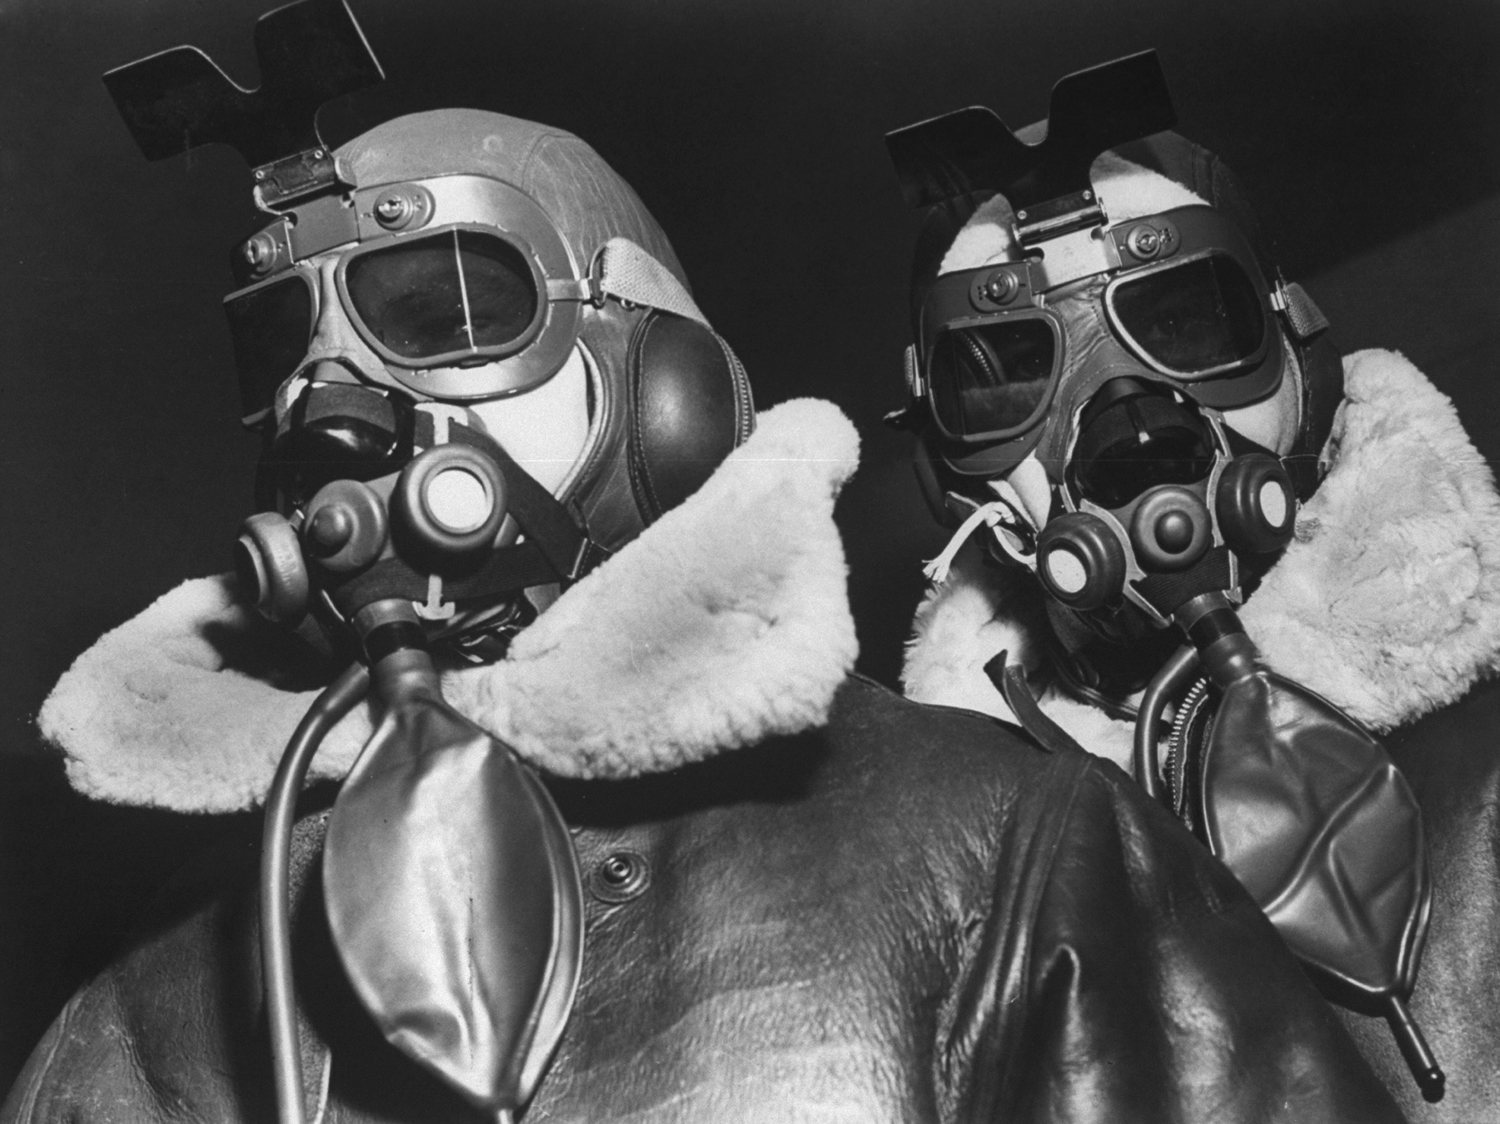 Two fliers of the VIII Bomber Command clad in high-altitude flying gear including sheepskin flight jackets, helmets, oxygen masks and goggles, 1942.